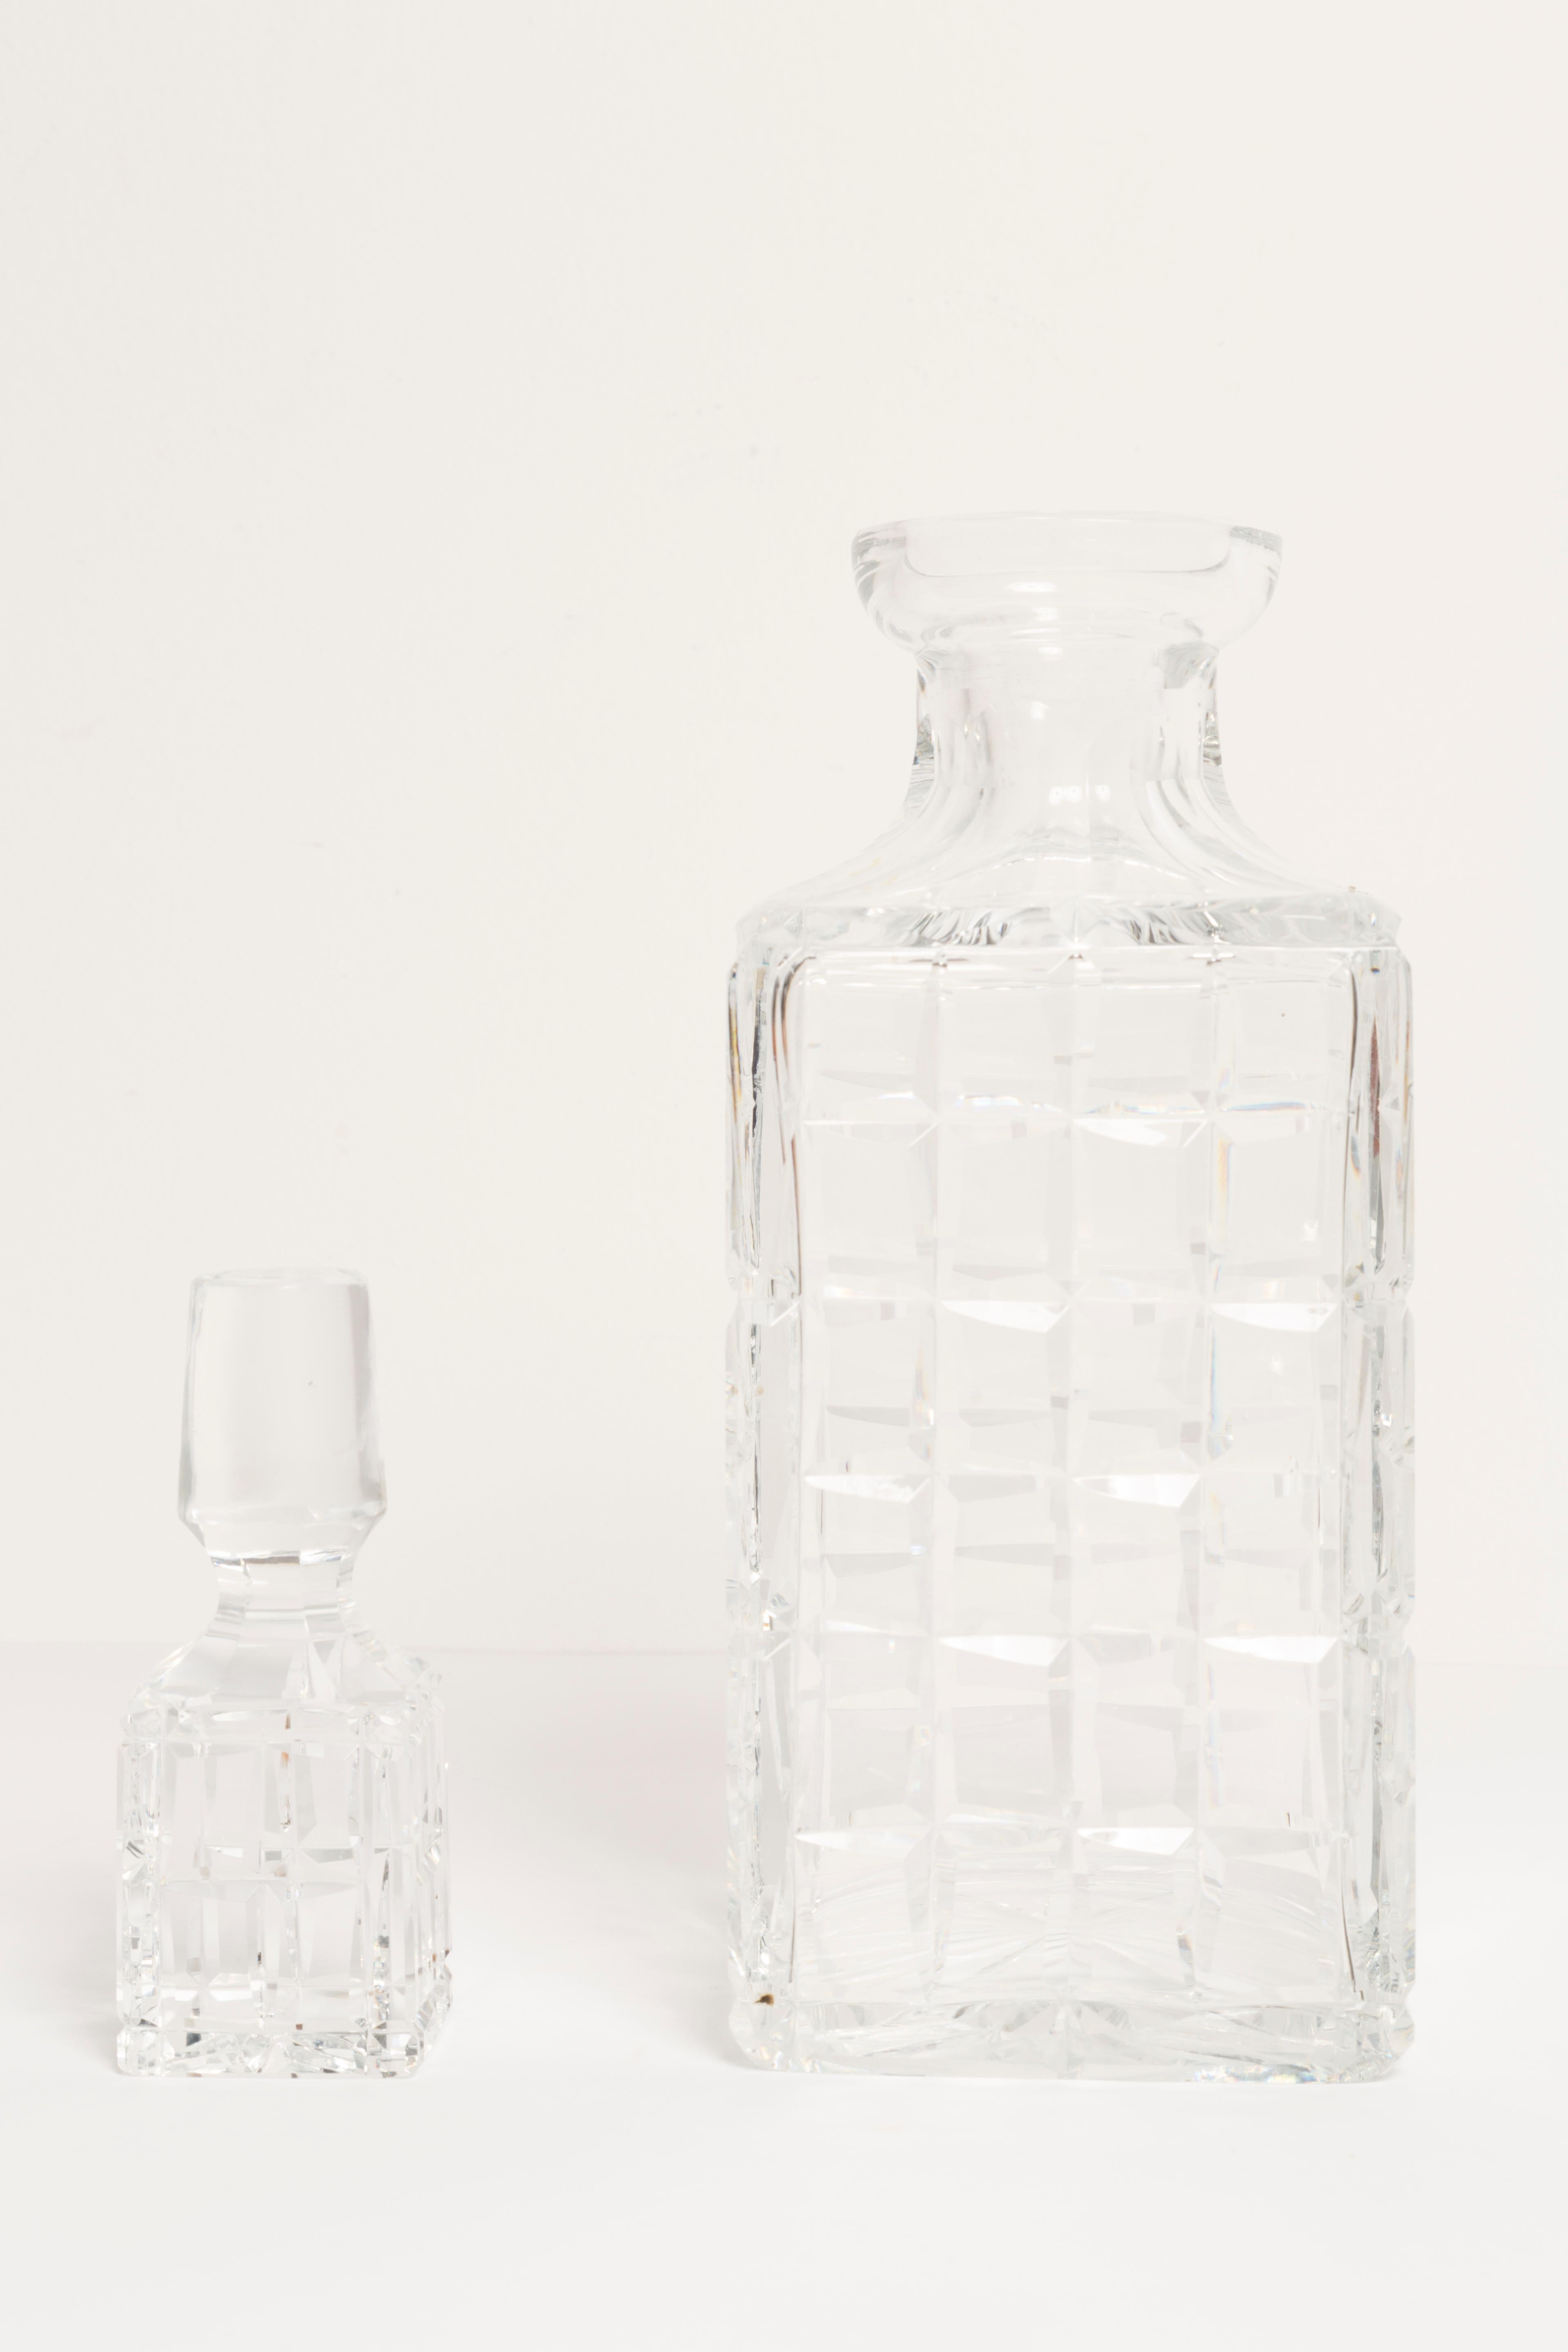 Mid-Century Transparent Crystal Glass Decanter with Stopper, Europe, 1960s For Sale 3